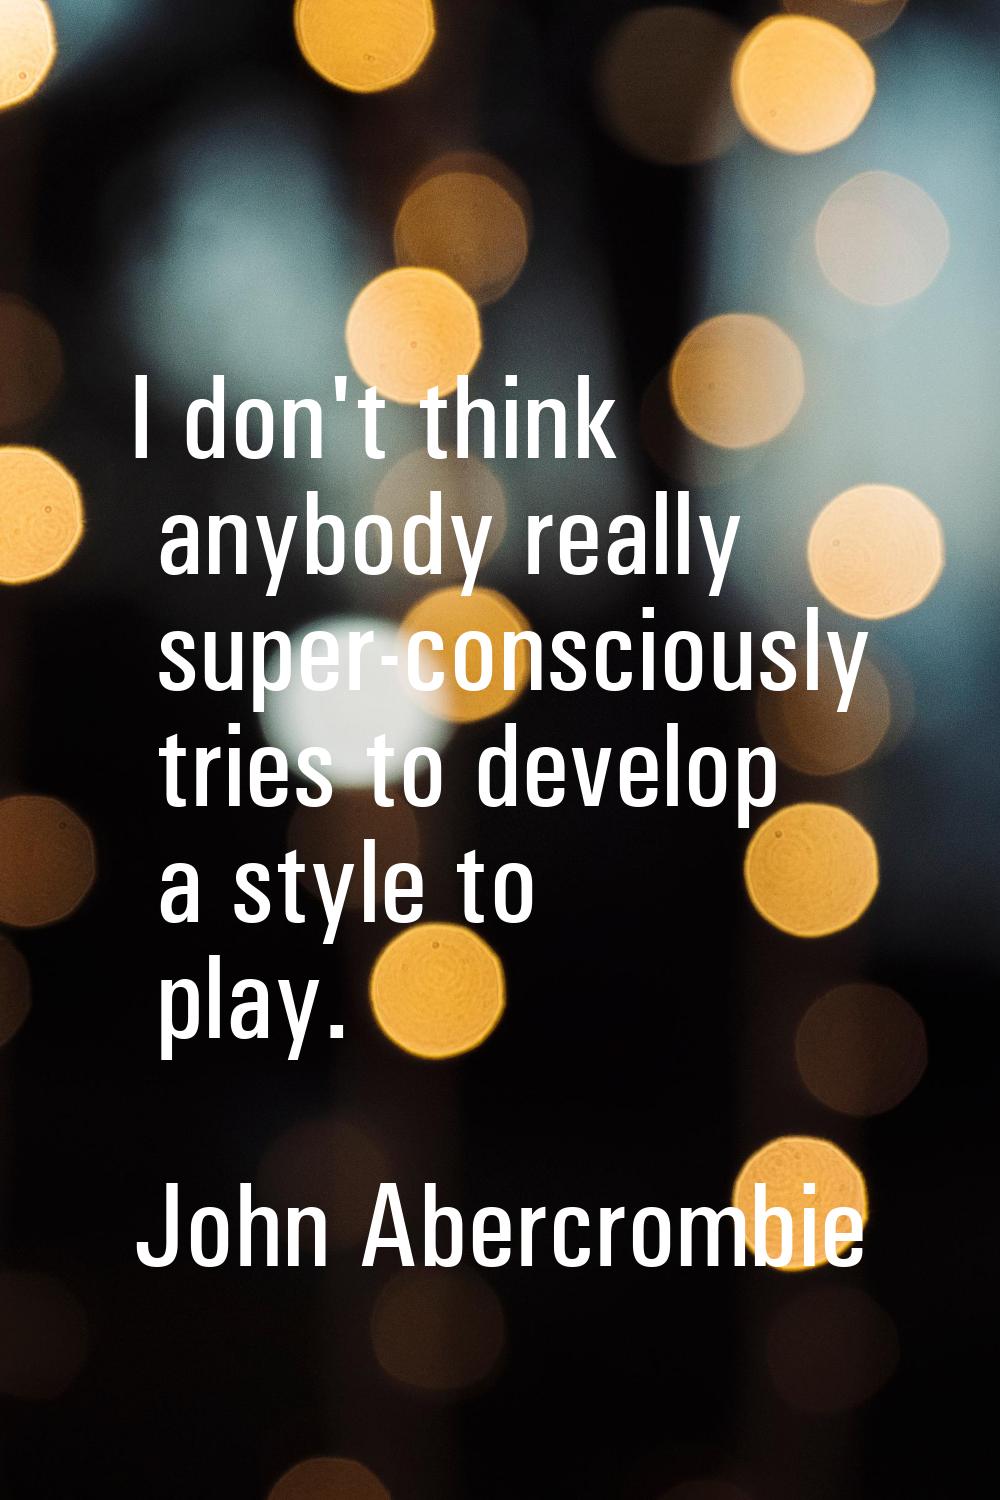 I don't think anybody really super-consciously tries to develop a style to play.